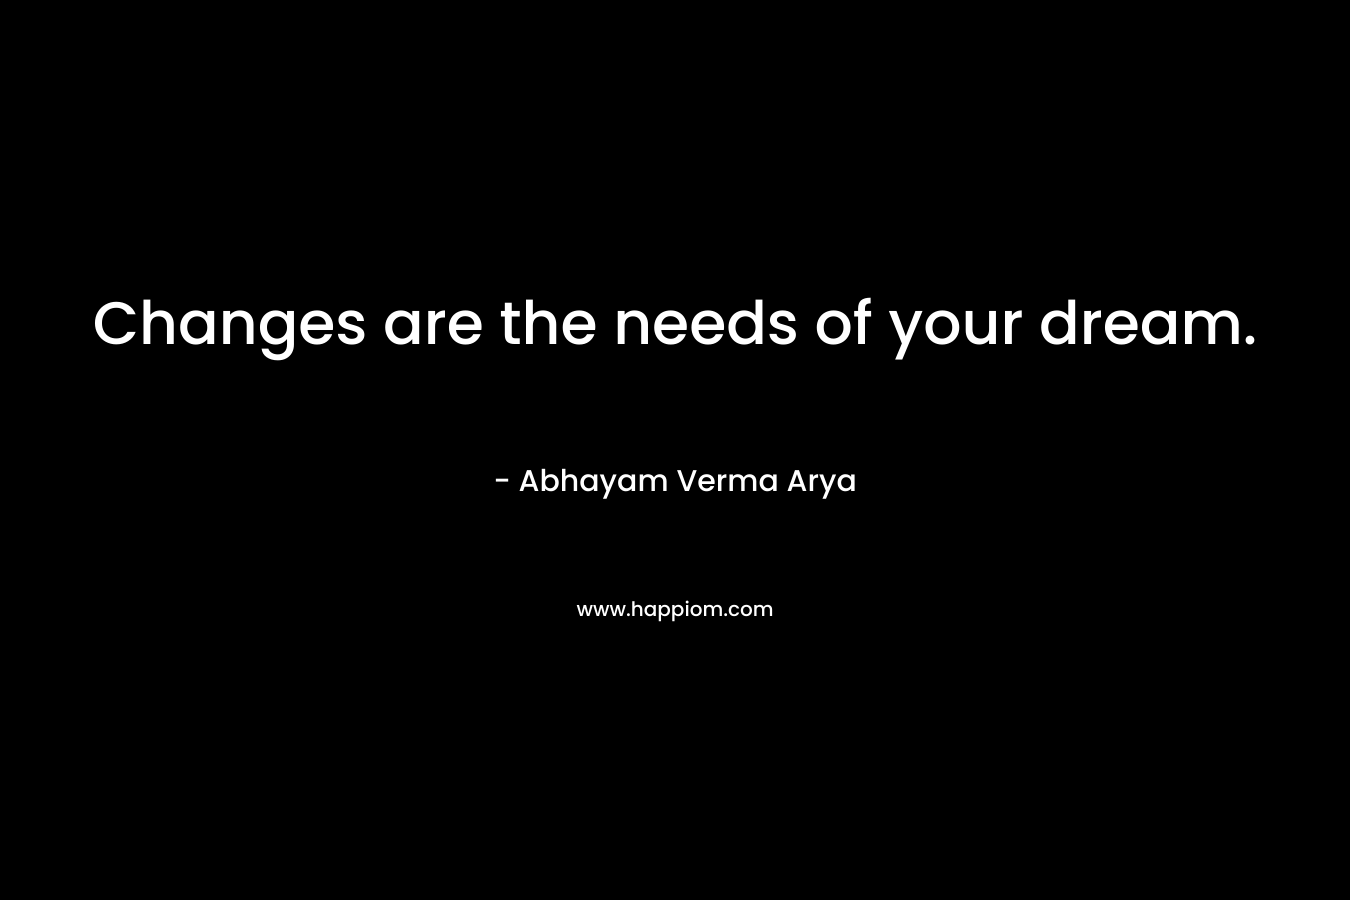 Changes are the needs of your dream. – Abhayam Verma Arya